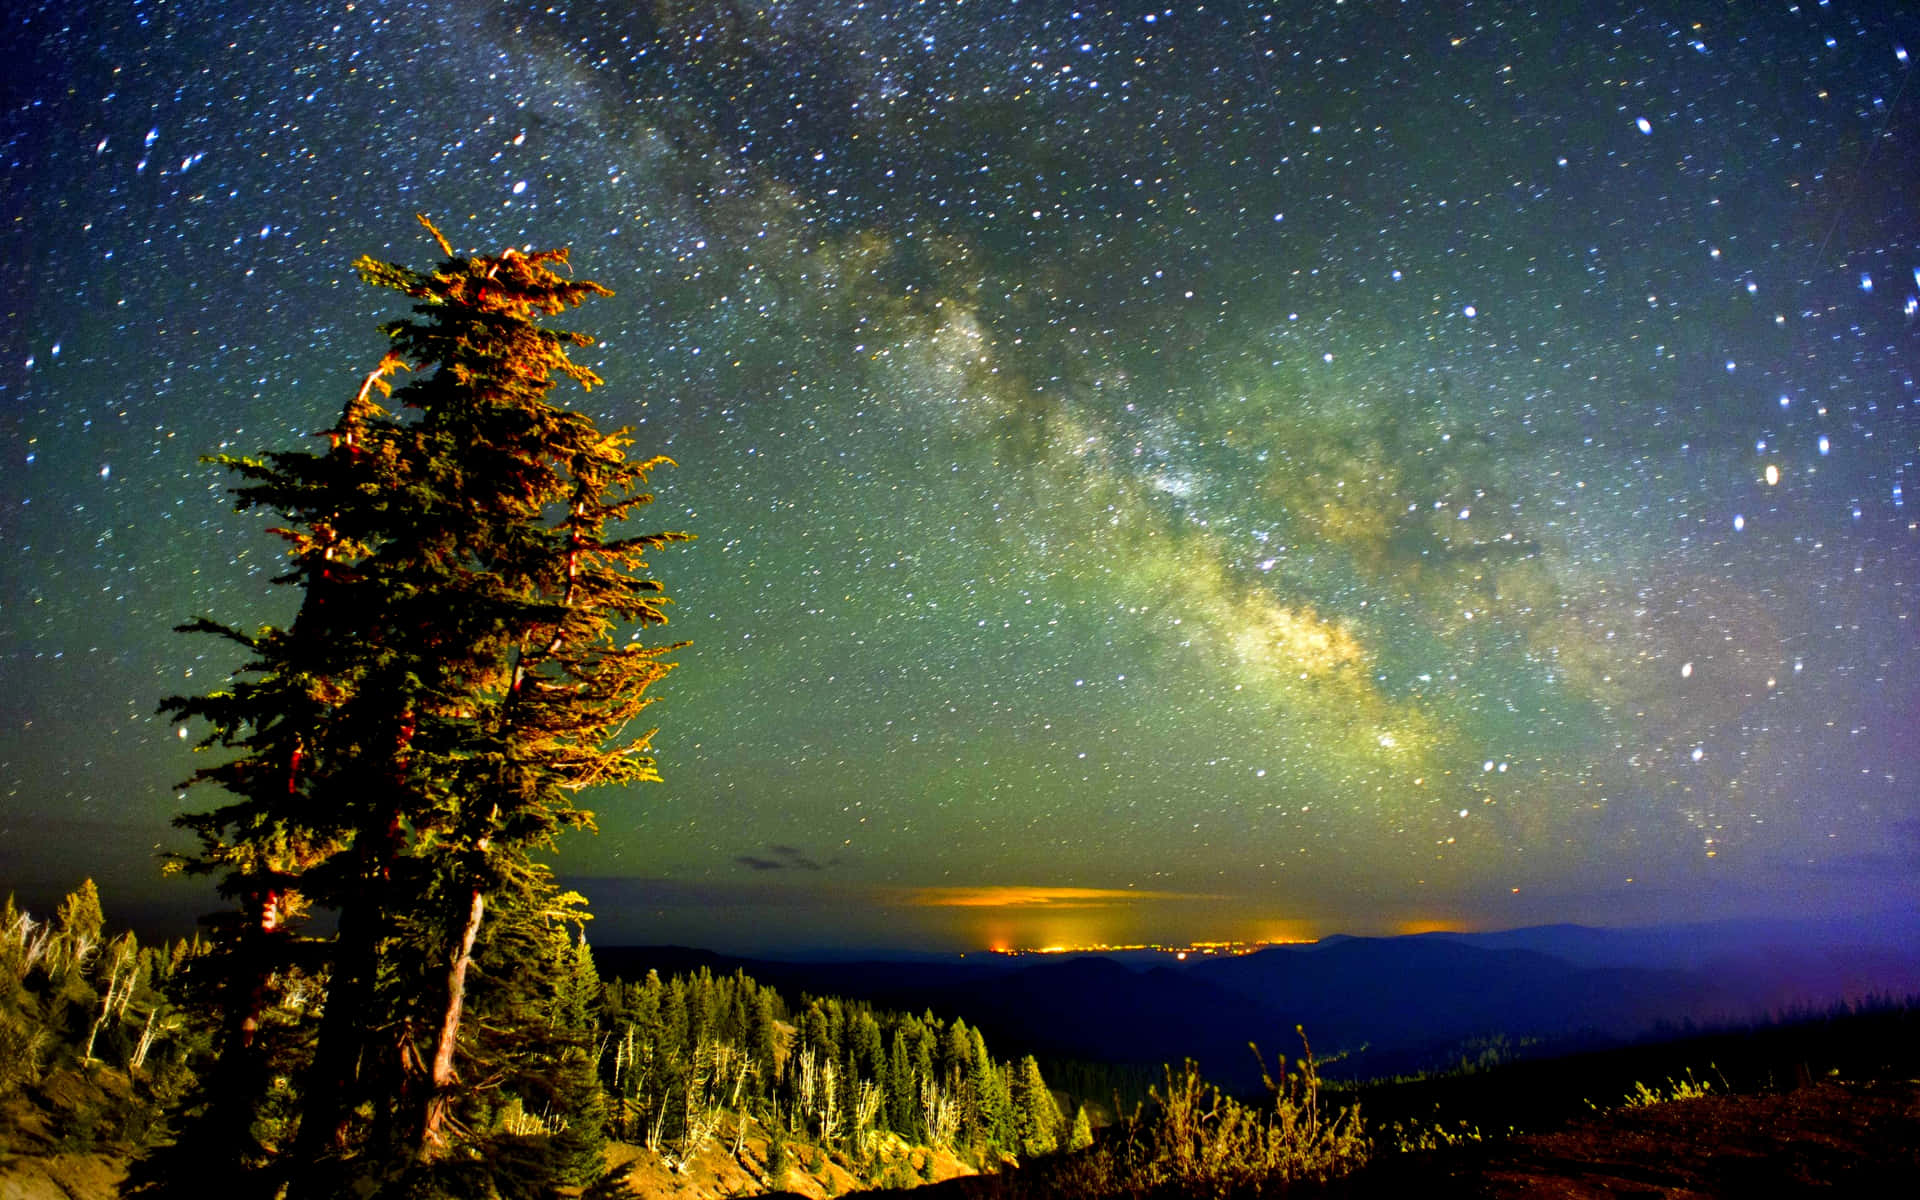 Look up and appreciate the beauty of the starry night.